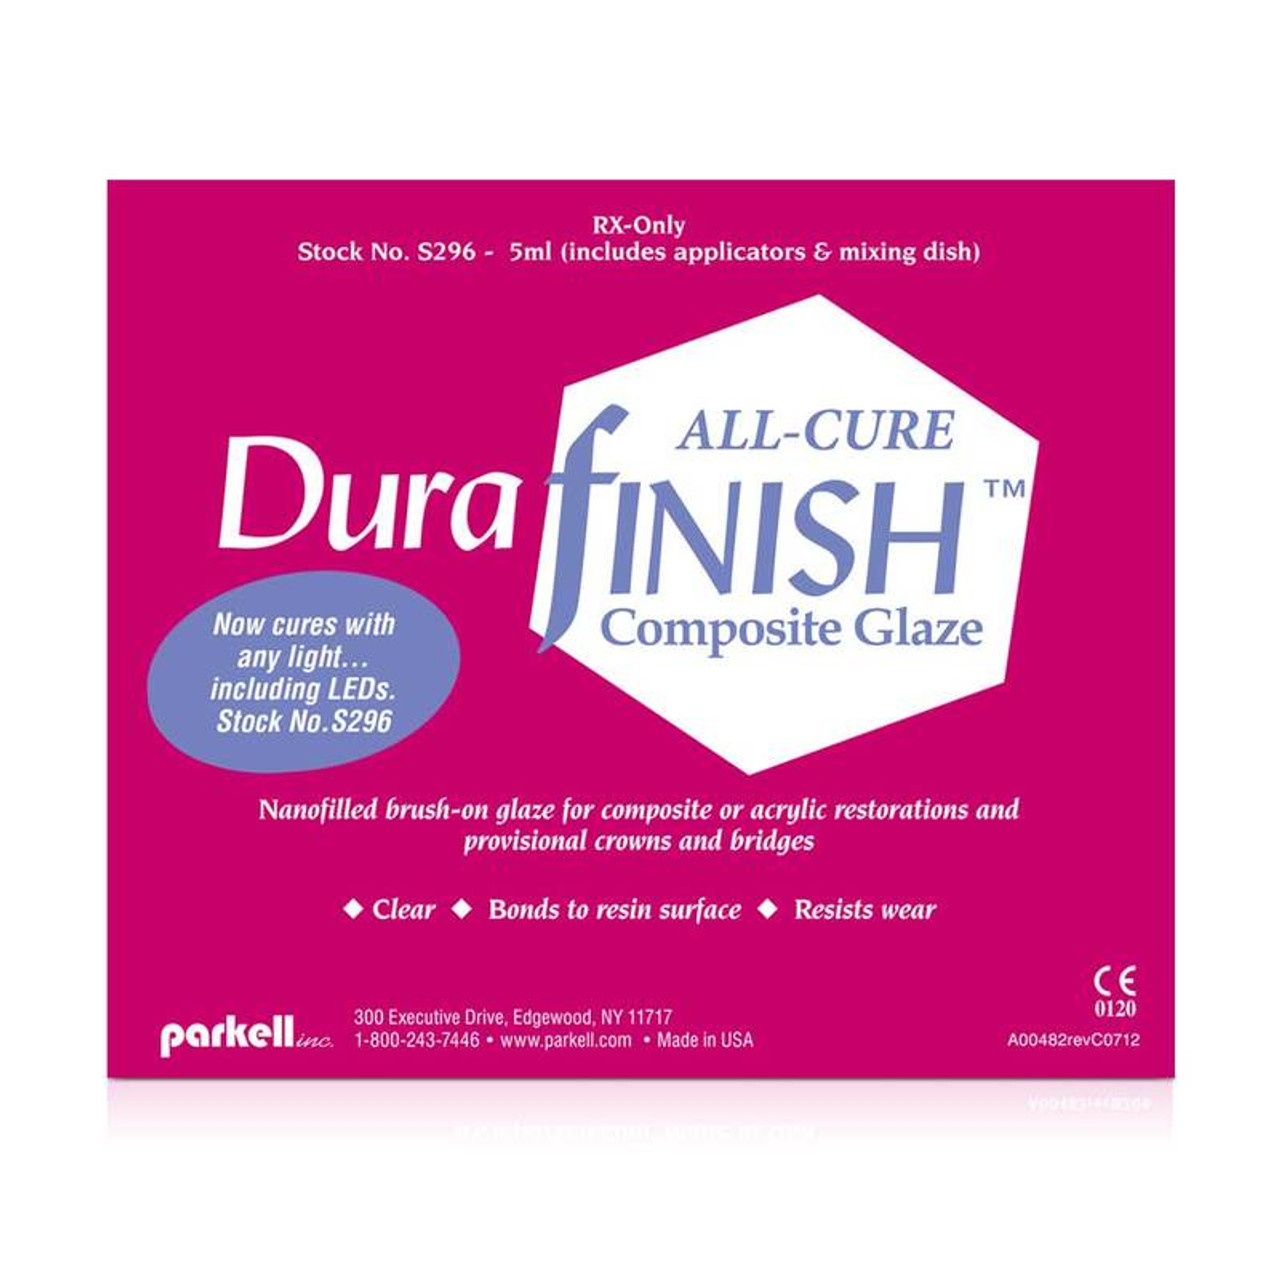 DURAFINISH ALL-CURE (use any dental curing light)